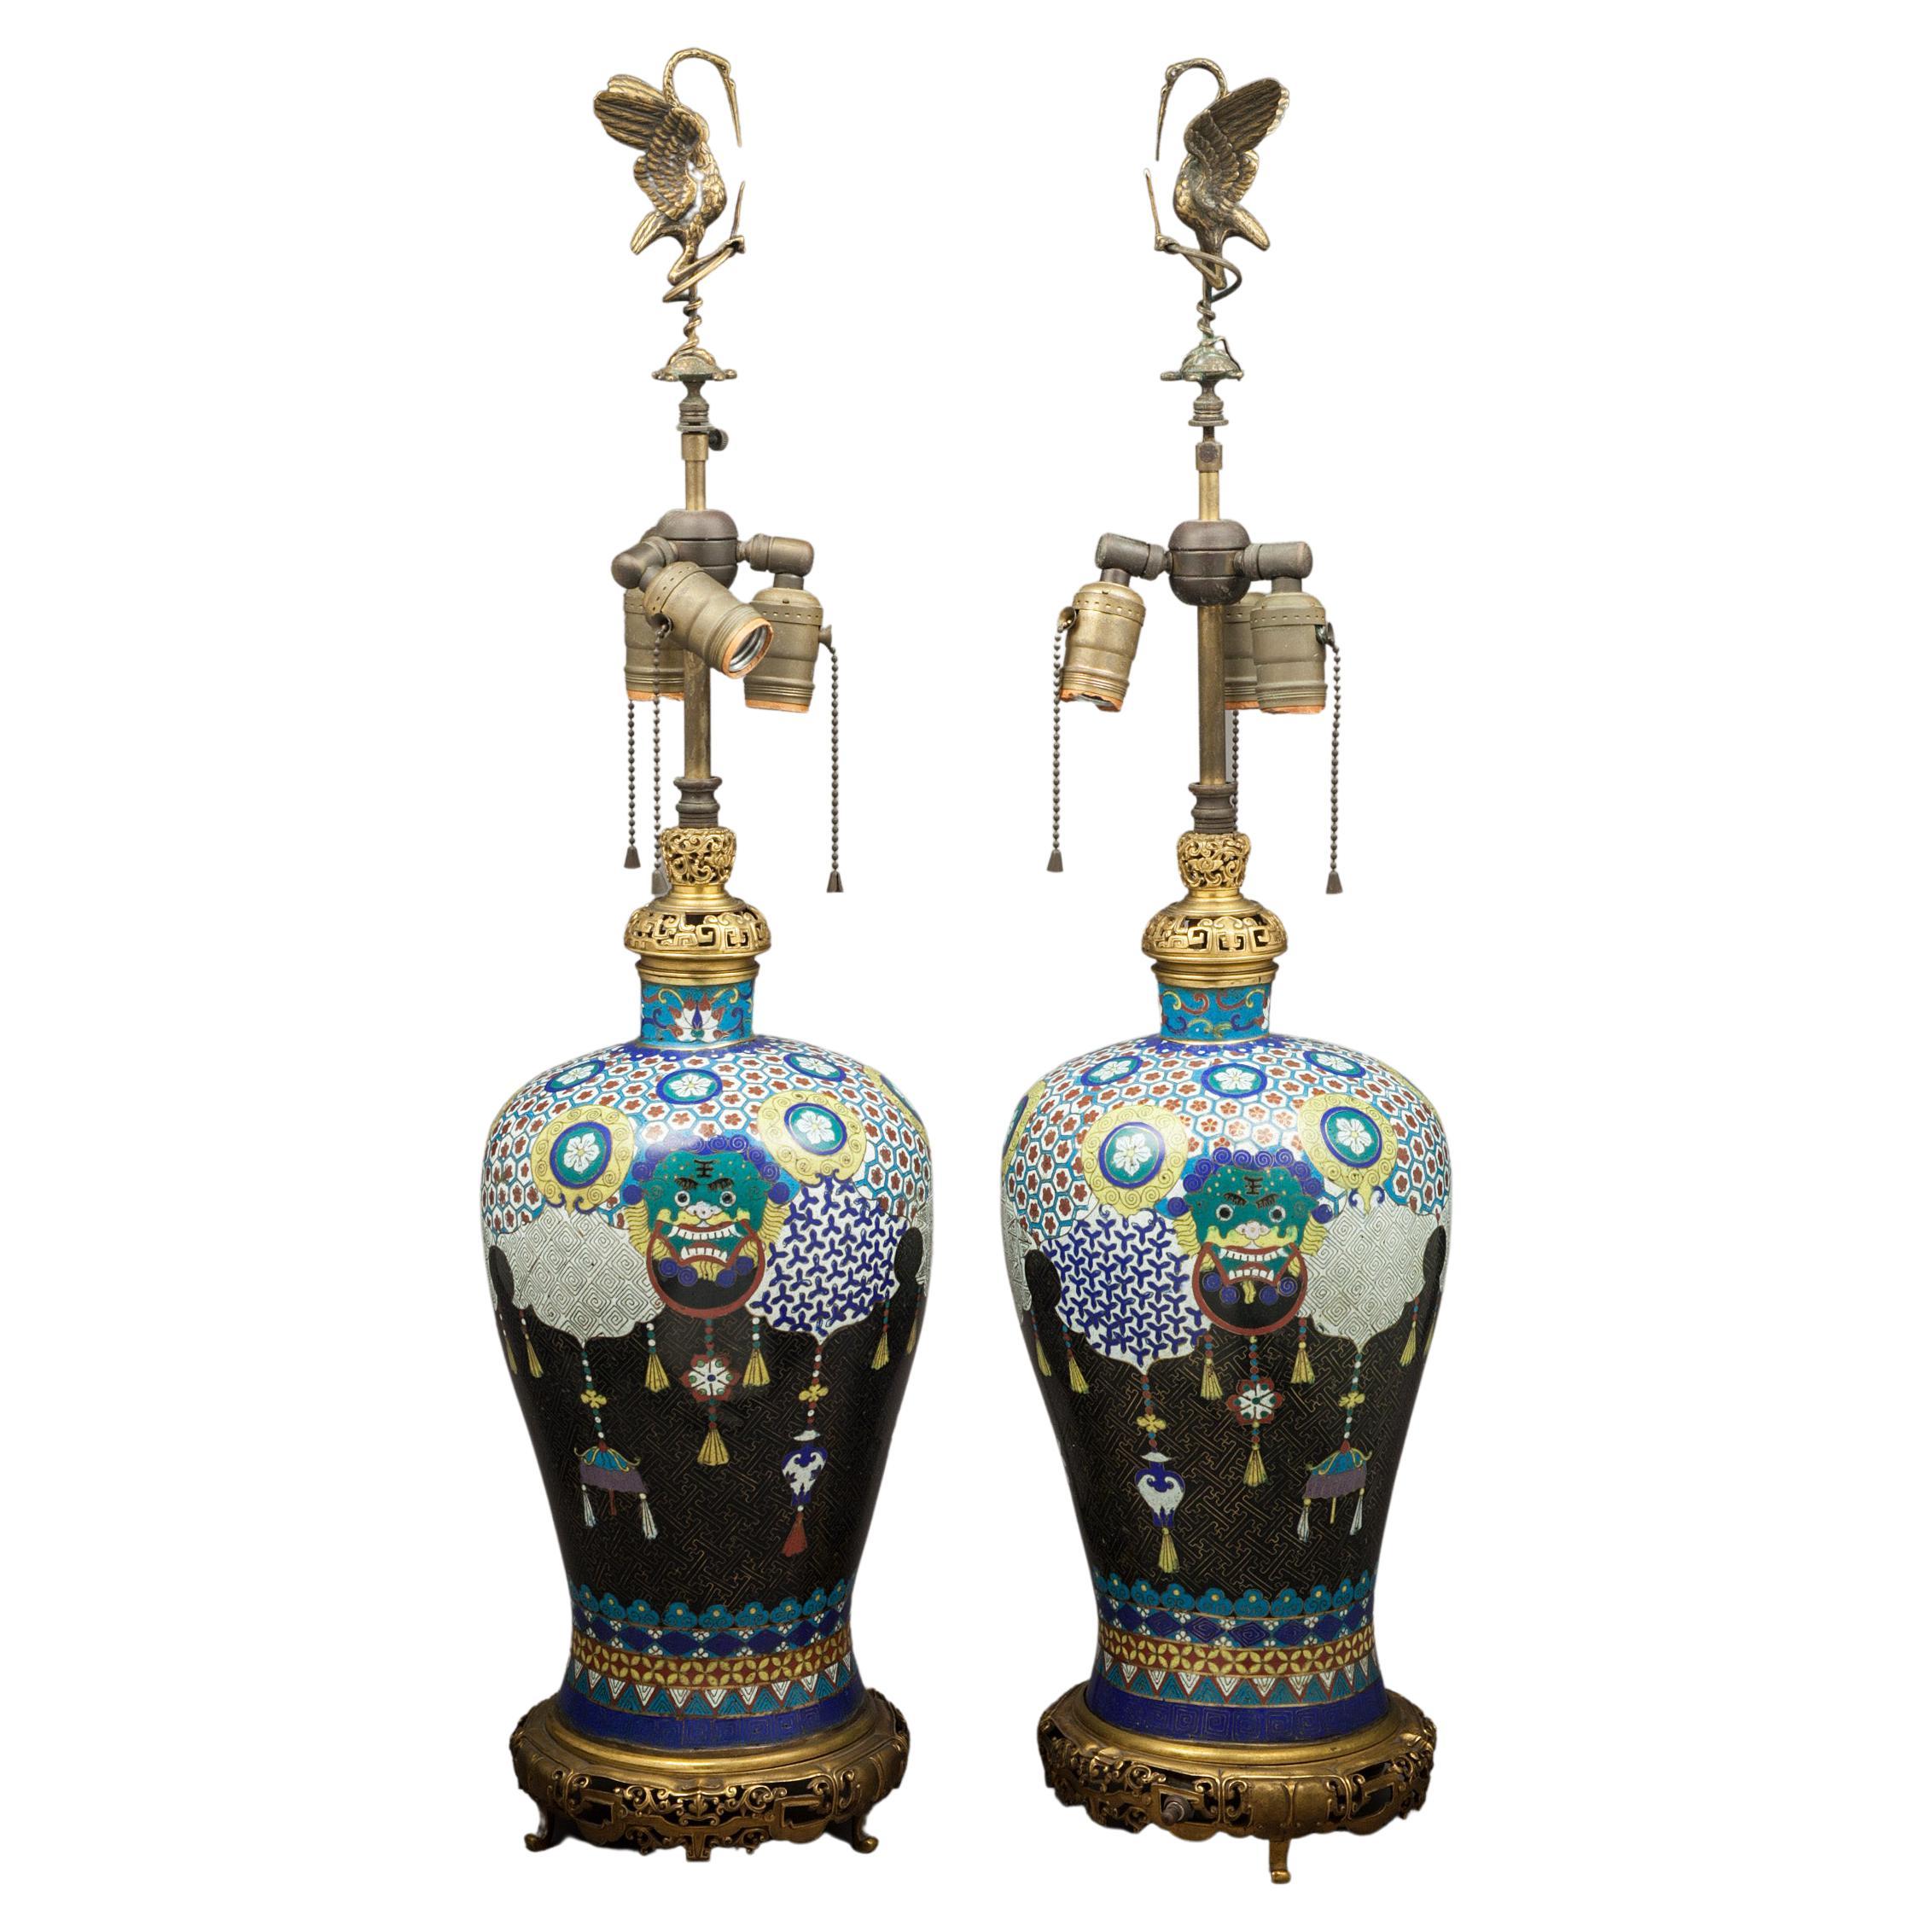 Pair of Bronze Mounted Cloisonné Chinoiserie Lamps, French, circa 1880